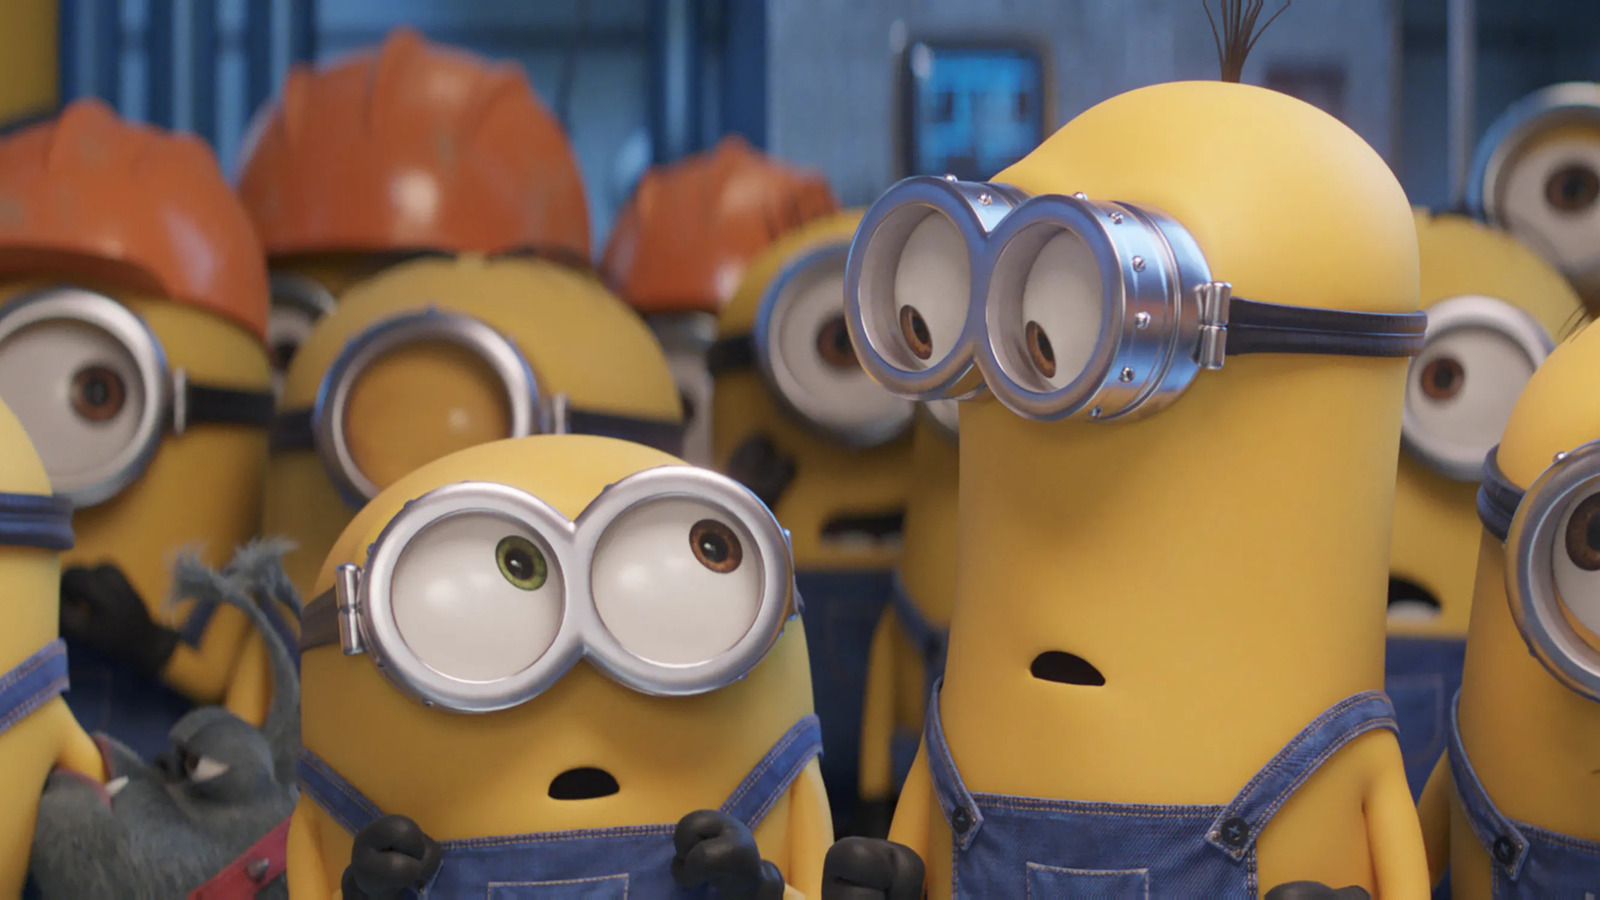 #What The Minionese In The Minions Movies Means